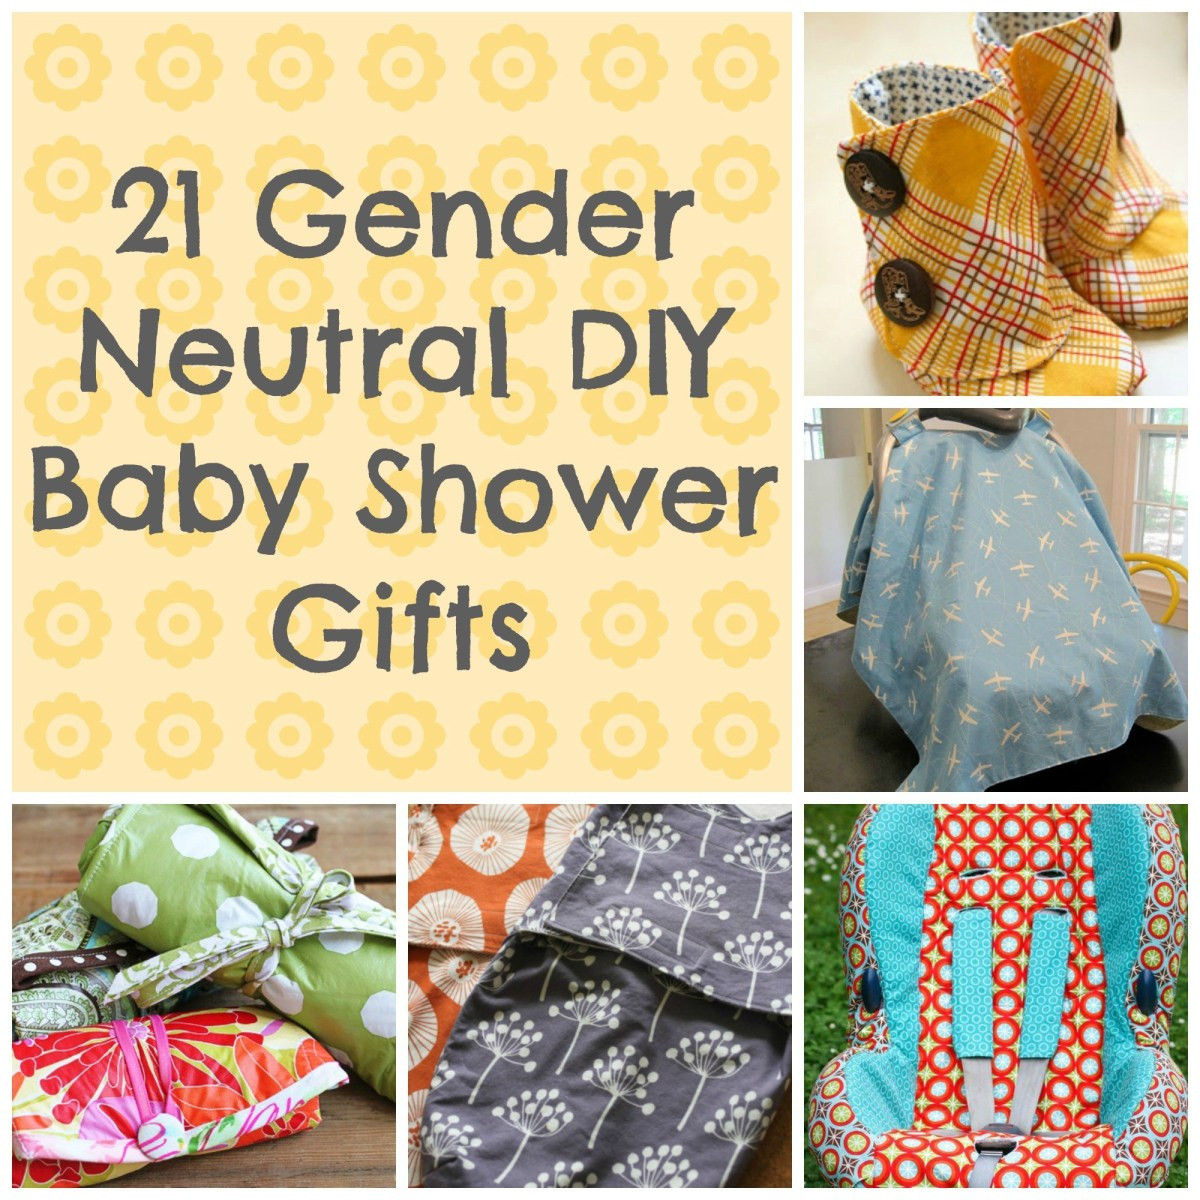 Unisex Baby Gift Ideas
 21 Awesome DIY Baby Shower Gift Ideas That Are Gender Neutral